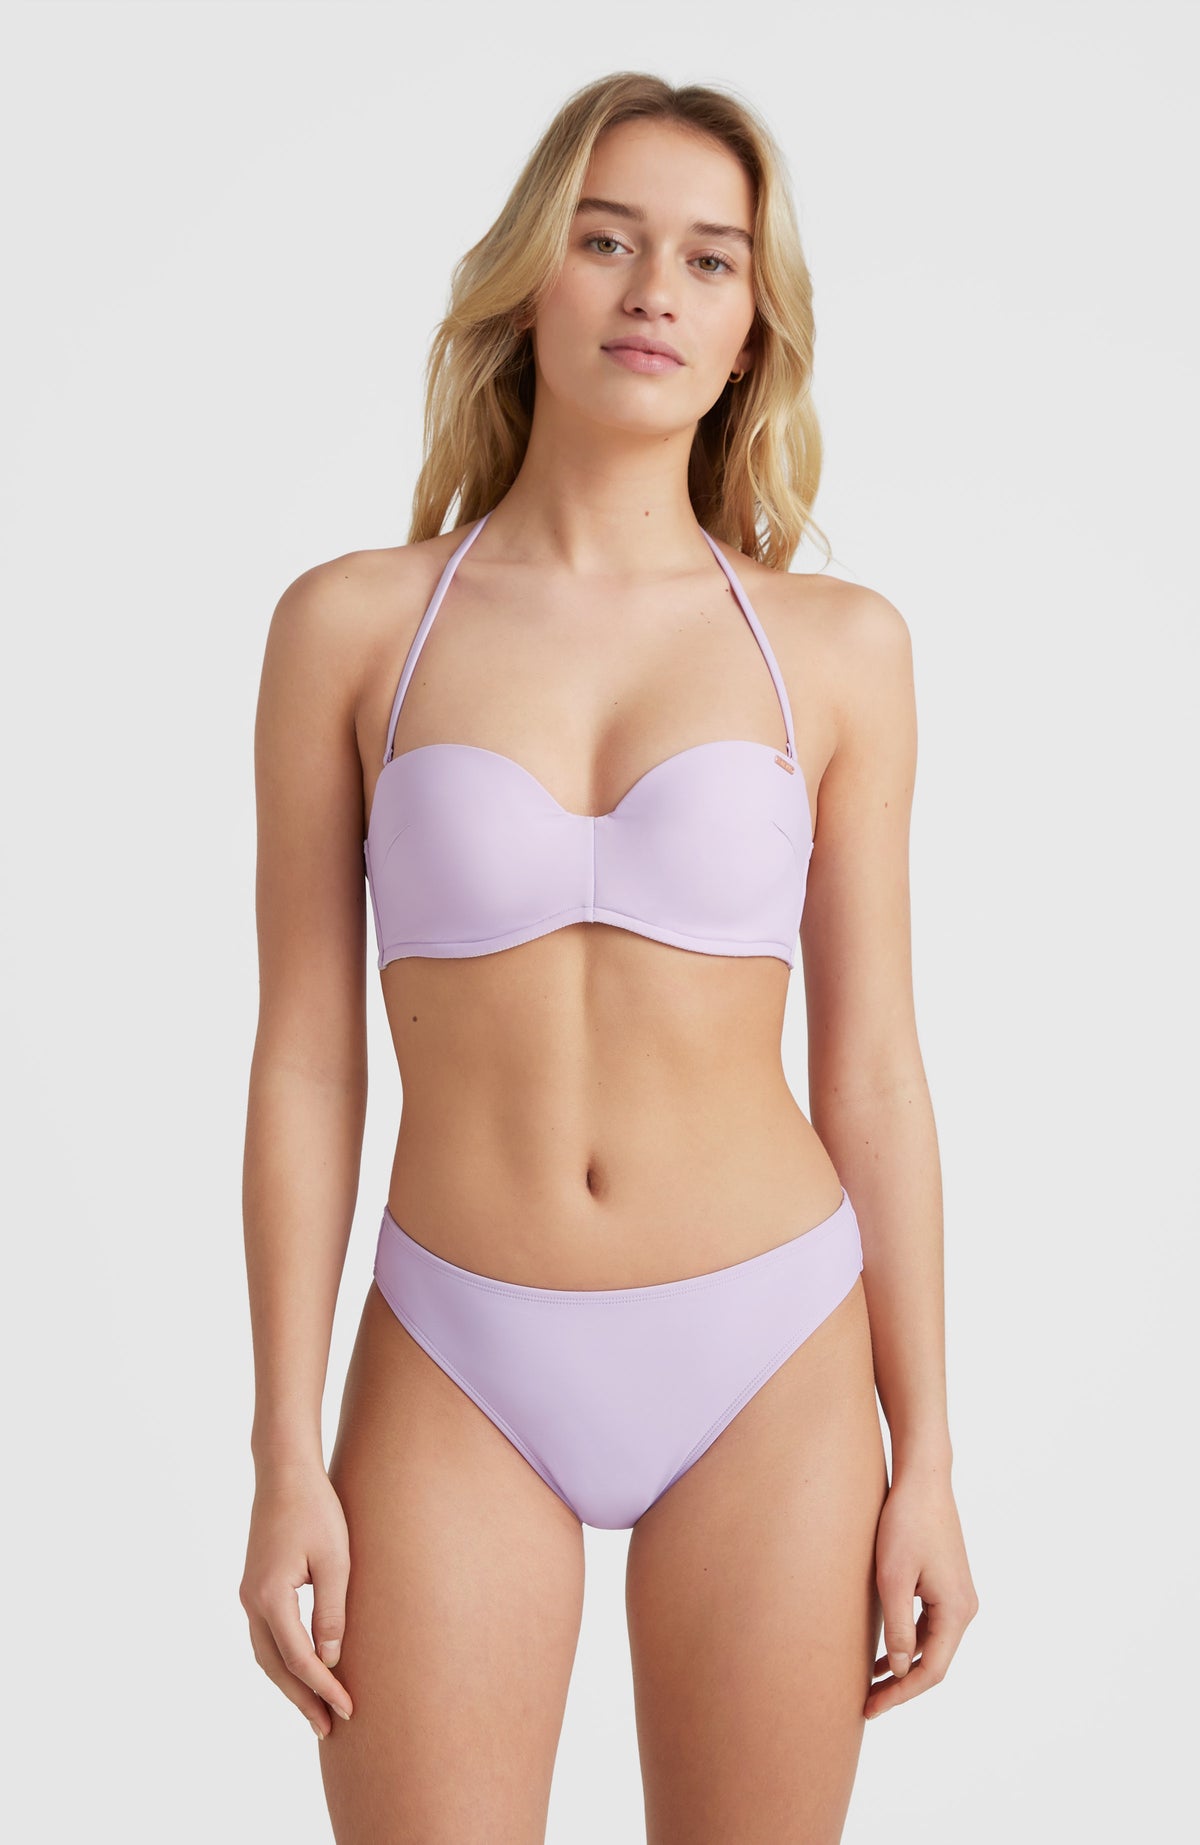 Tommy Hilfiger Bandeau Bikinis for Women sale - discounted price